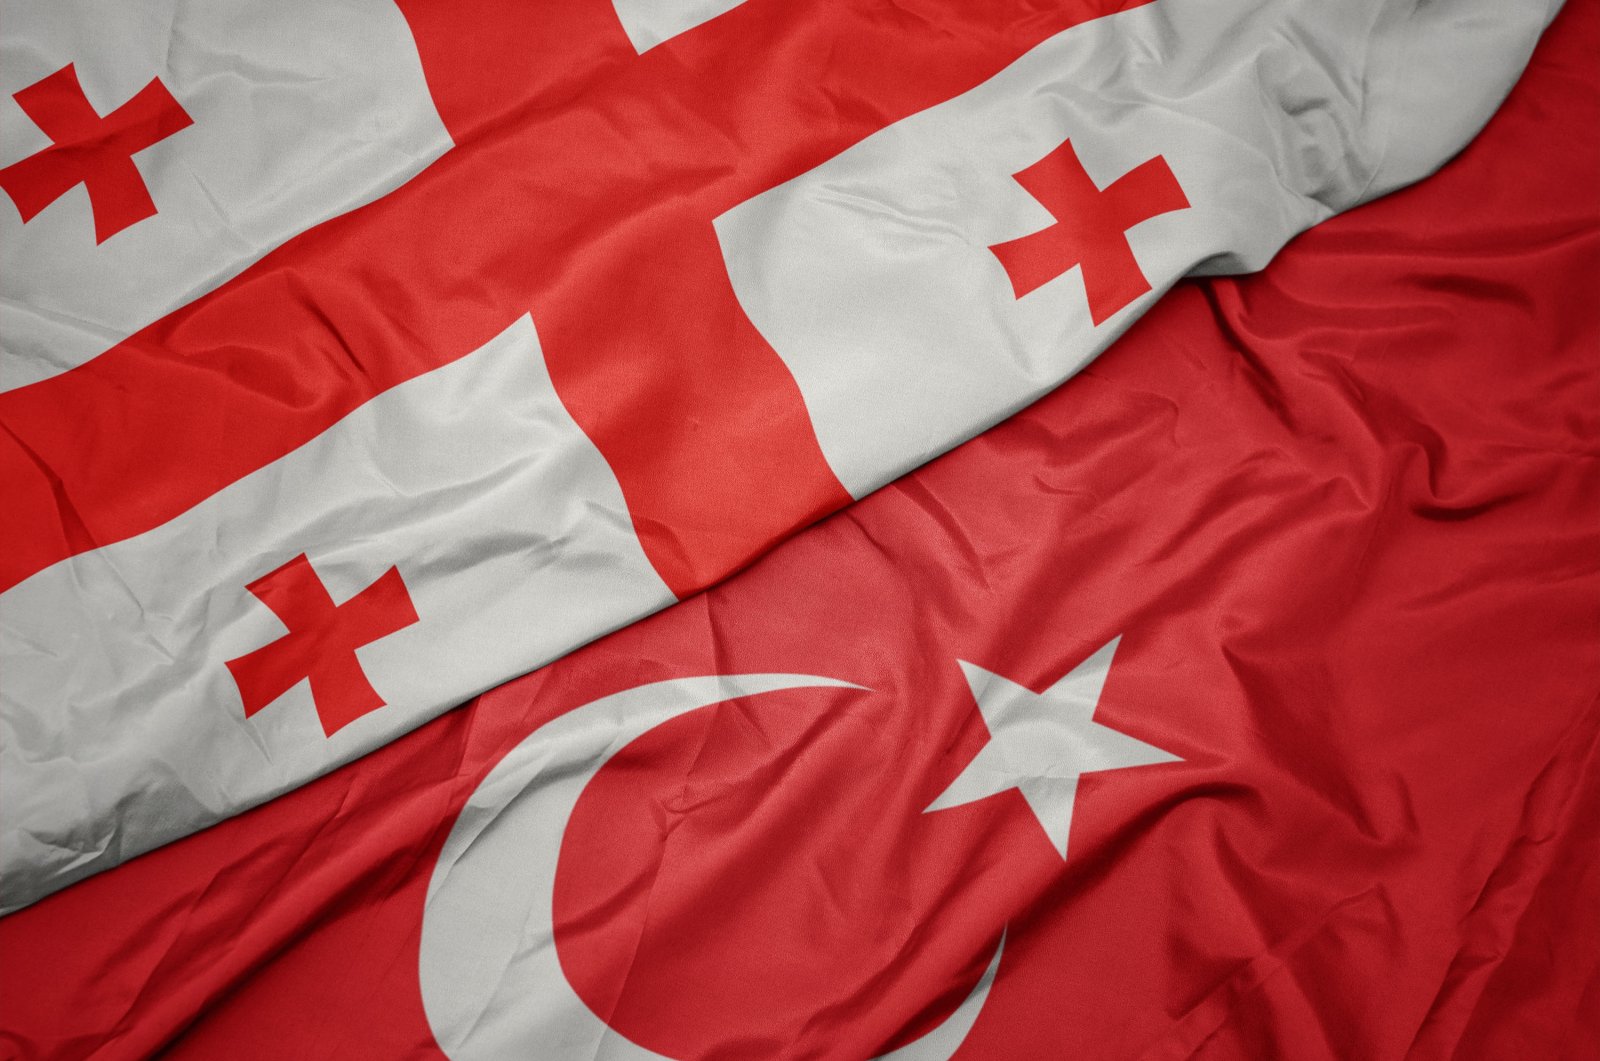 Flags of Turkey and Georgia in this undated file photo. (Shutterstock File Photo)